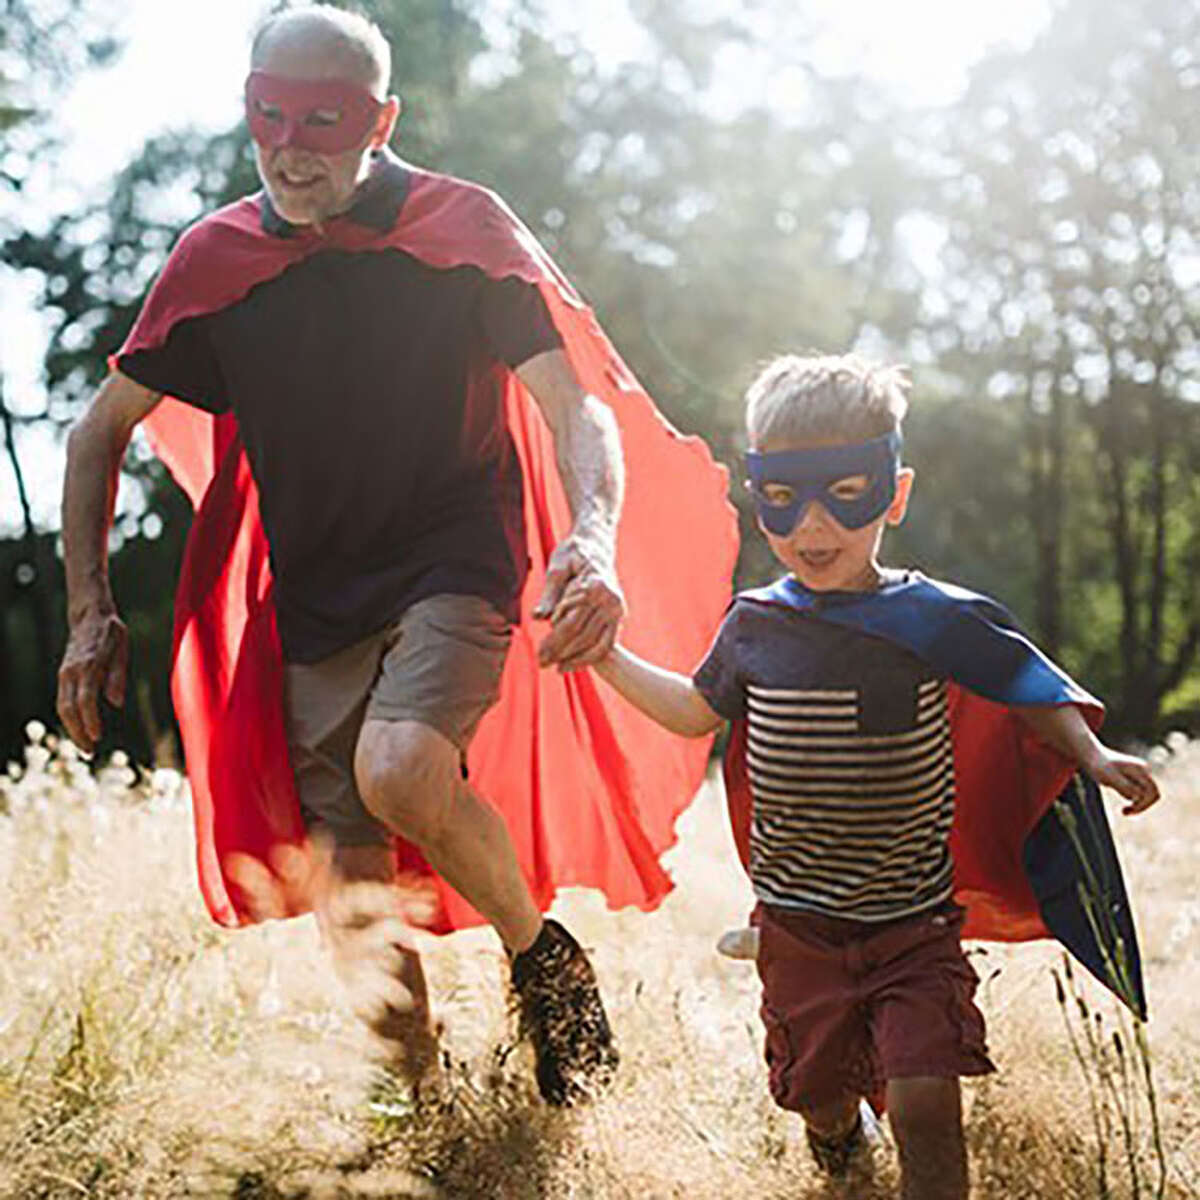 Having a personal my Social Security account is almost like having super powers. It protects you, and you can even look into your financial future. 